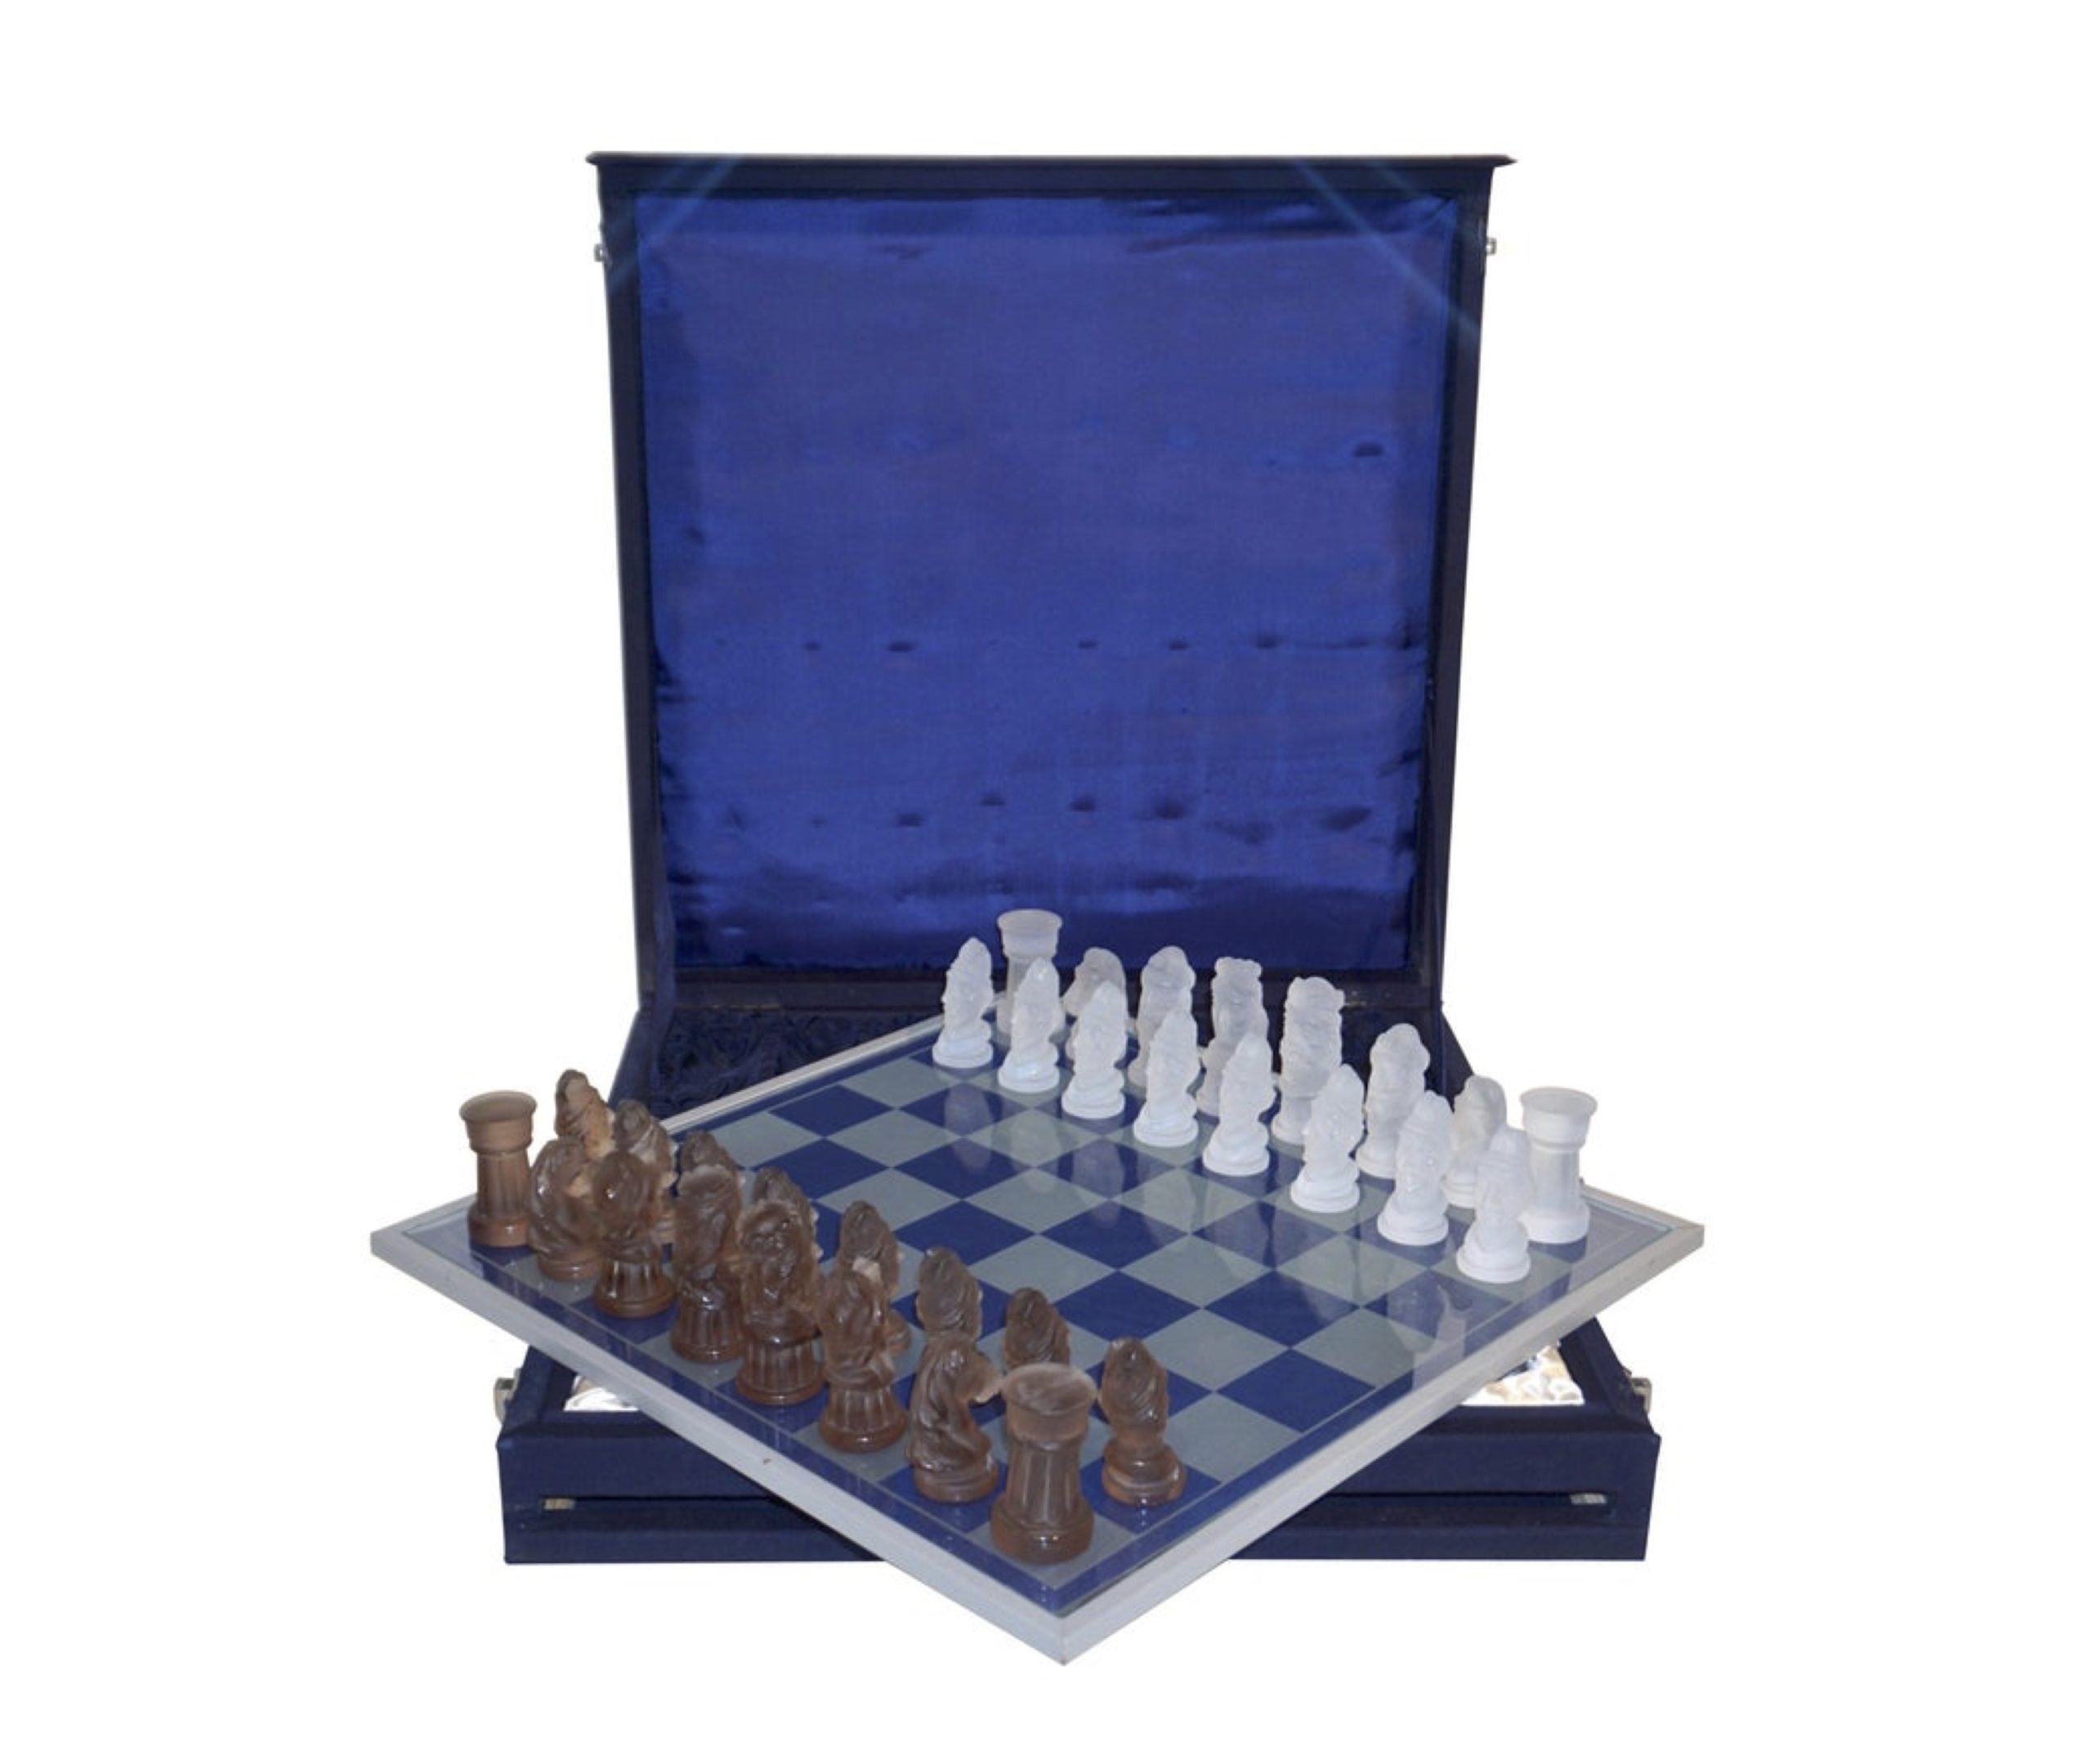 cosulich_interiors_and_antiques_products_new_york_design_center_1960s_vintage_white_bronze_color_bohemia_glass_czech_chess_set_blue_box-scaled-1